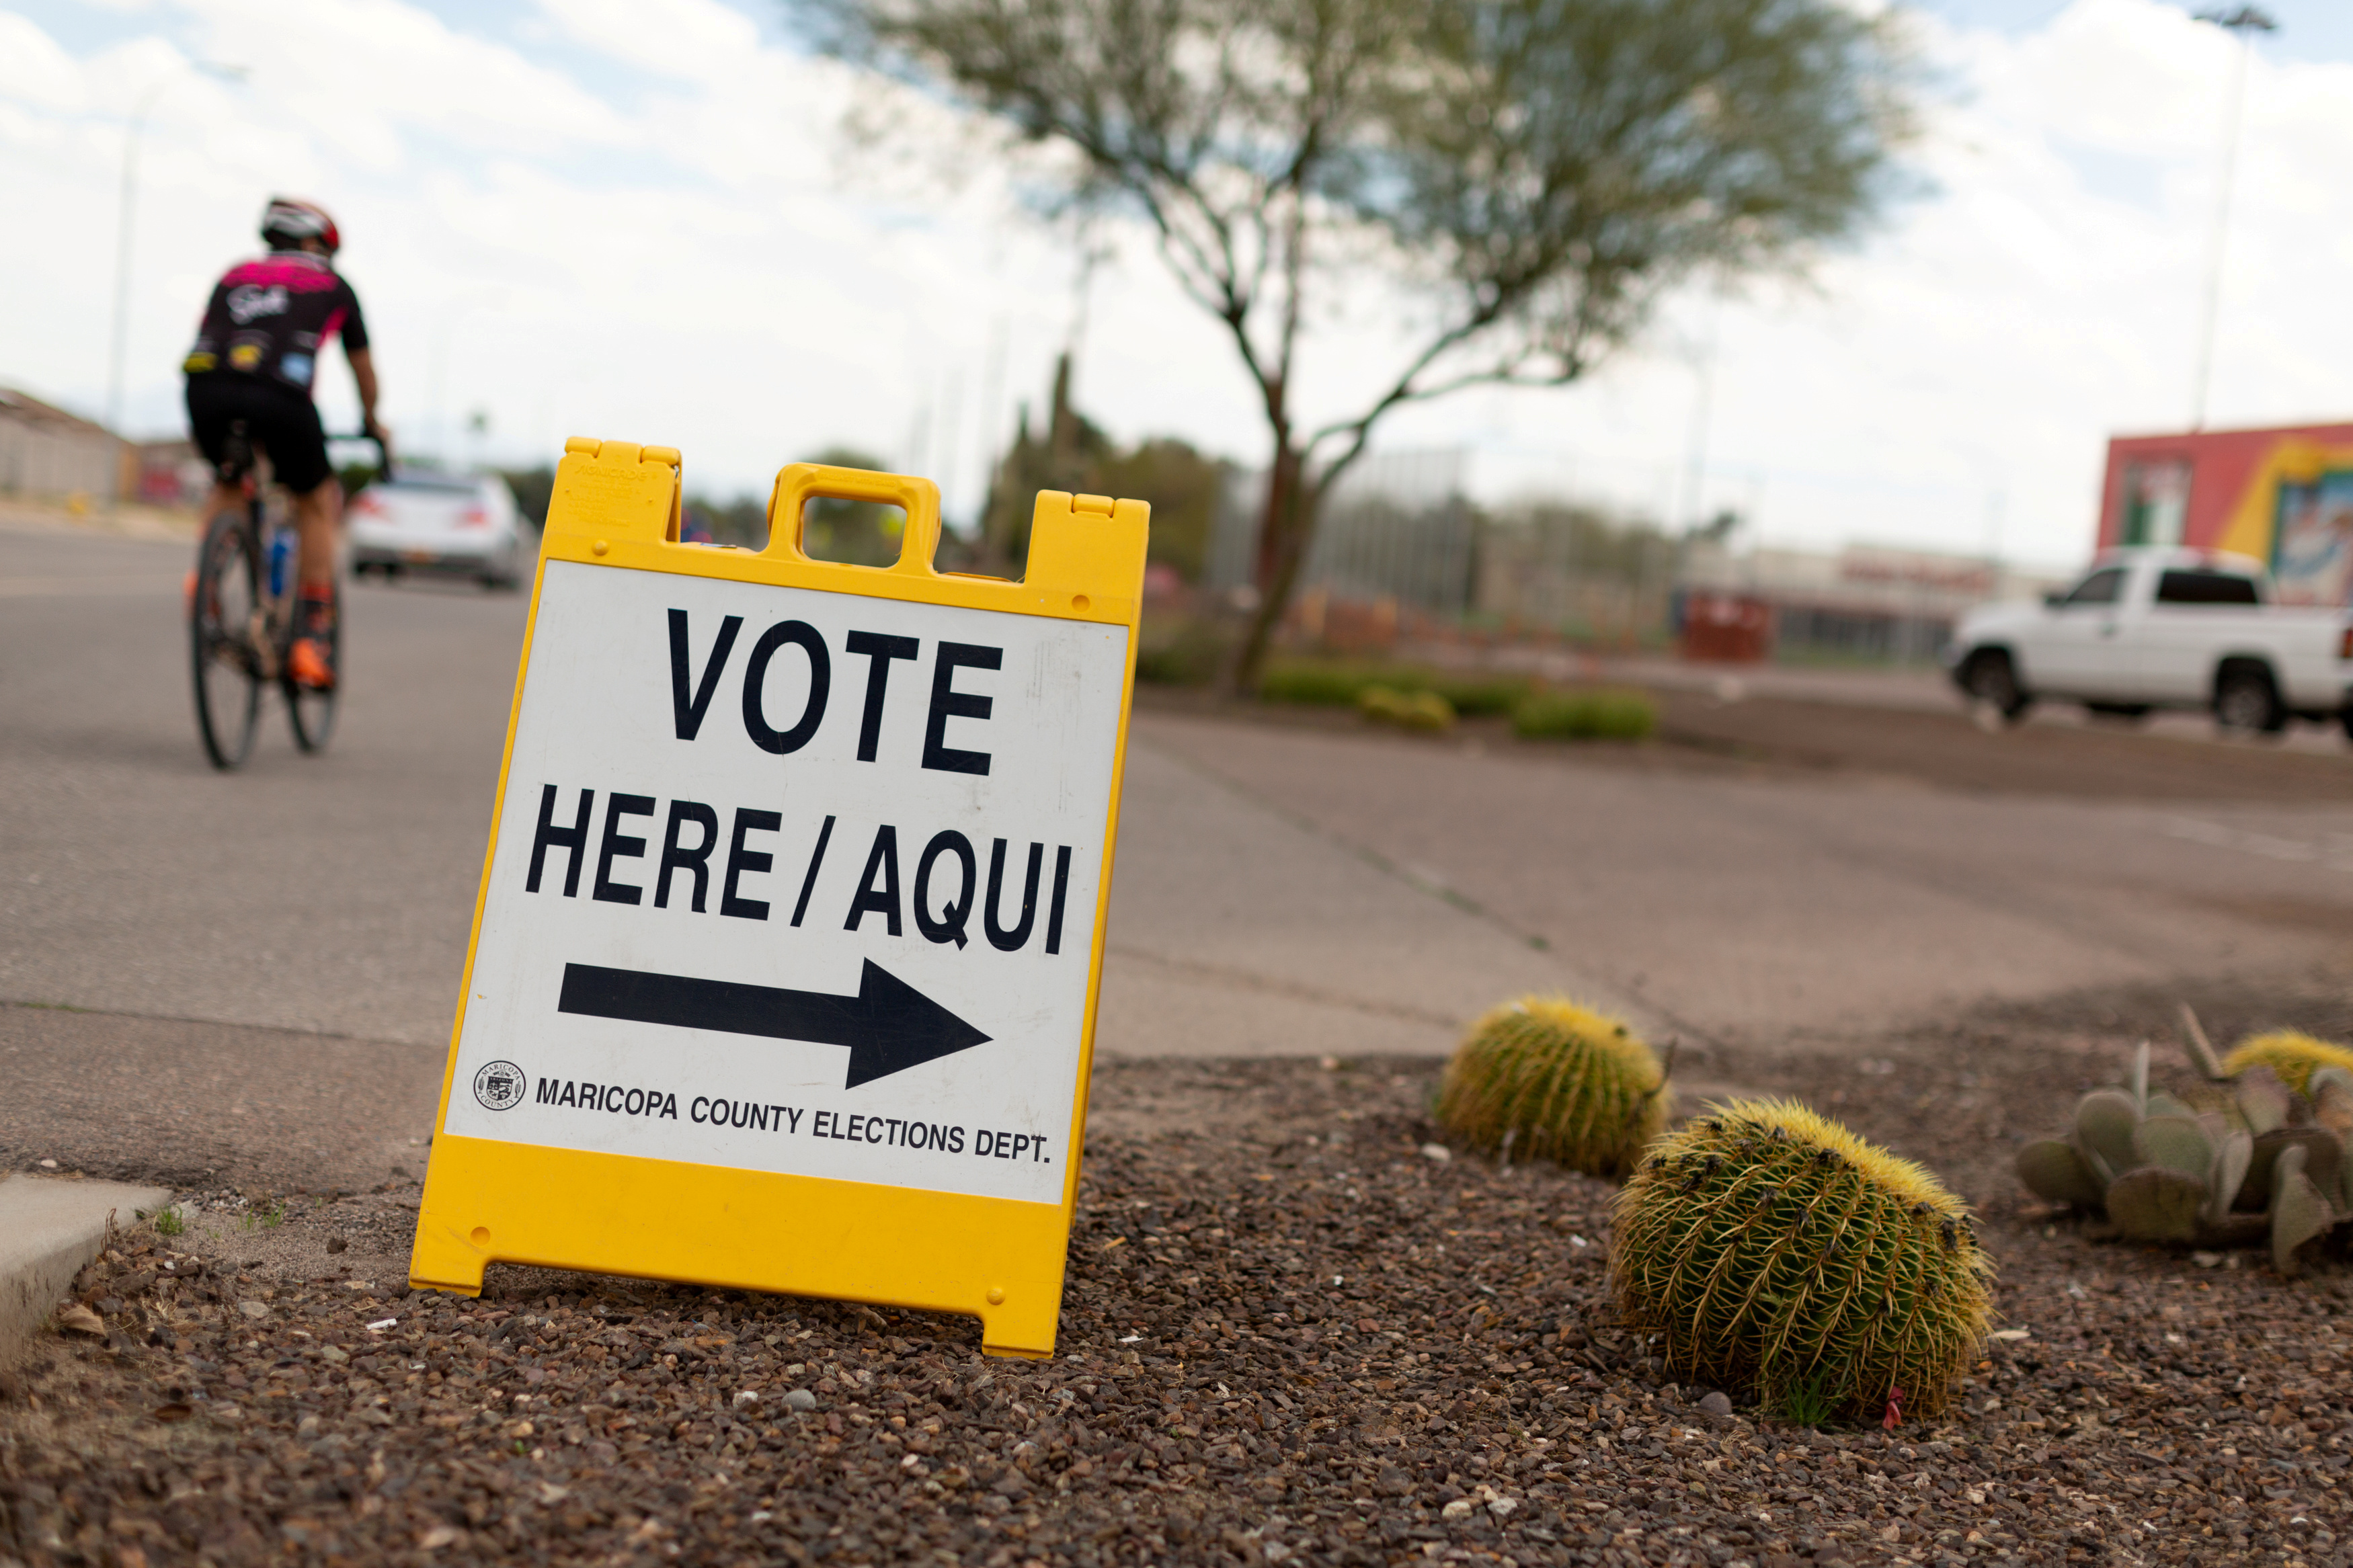 Voters cast their ballots in the Democratic primary in Sun City